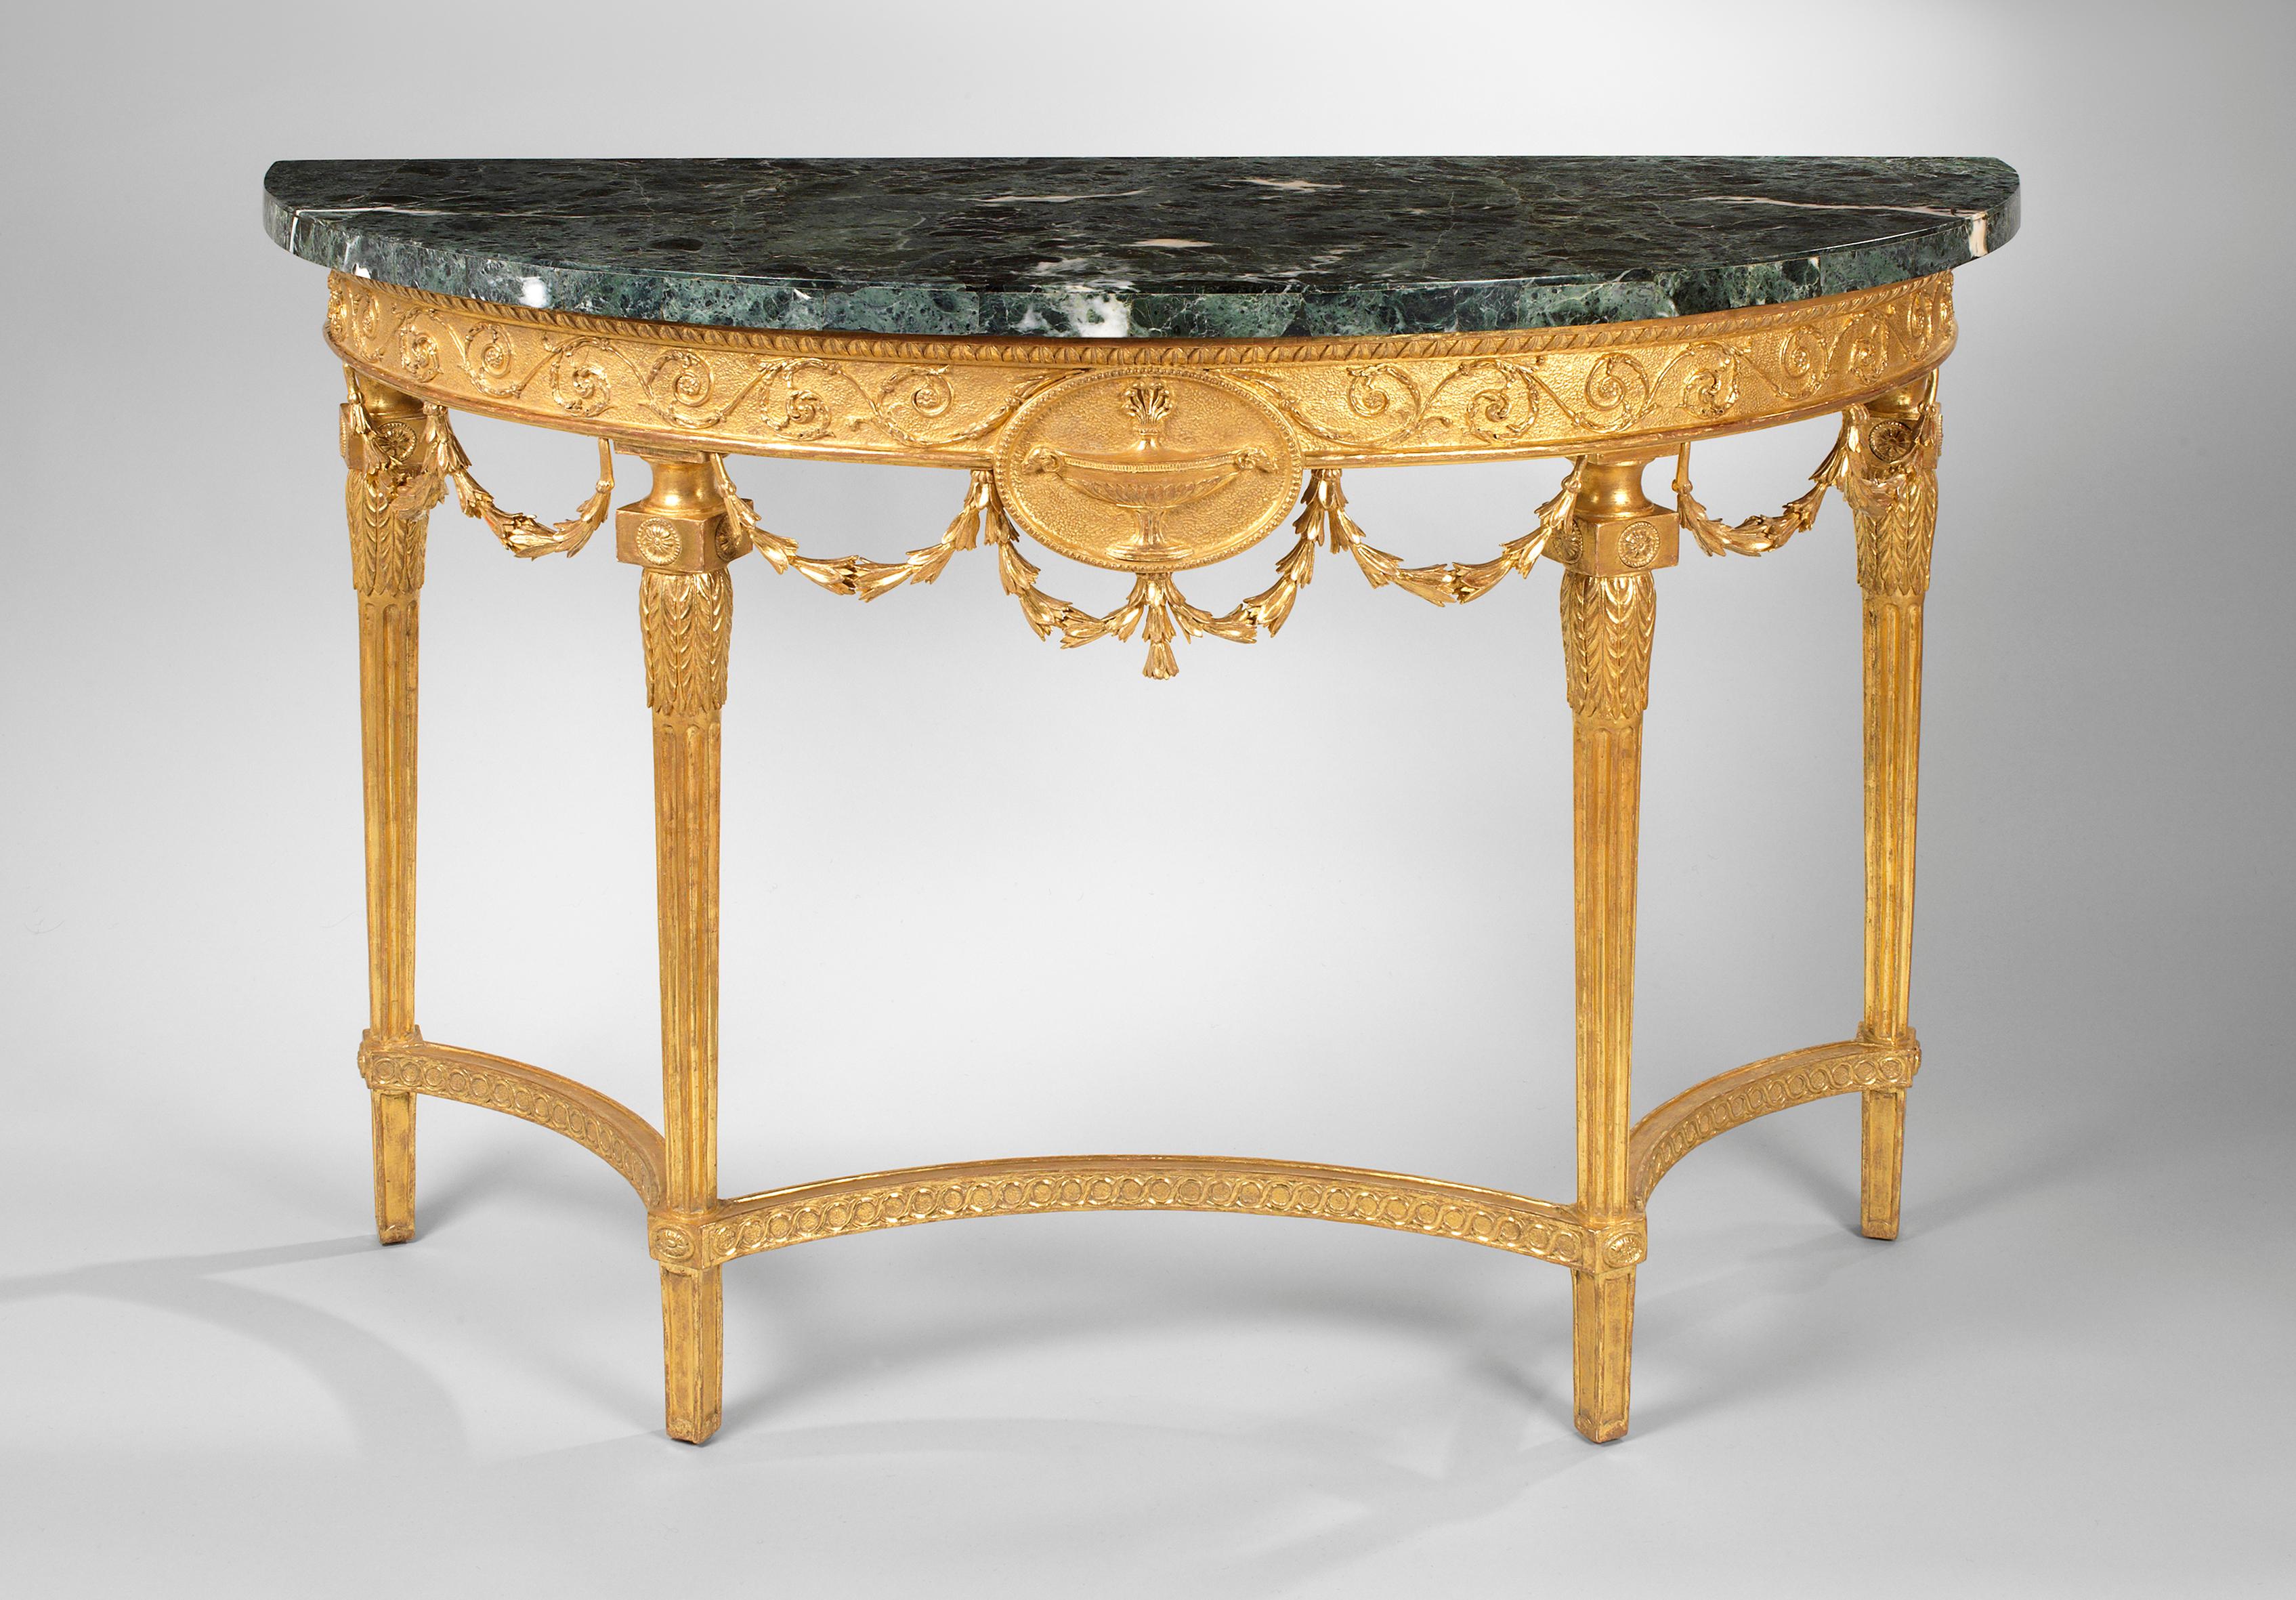 A fine pair of 18th century Adam Period carved giltwood demilune tables with marble tops above a burnished frieze with scrolling leaf; centred by a classical oval burnished medallion, decorated with a large central urn, the whole frieze being